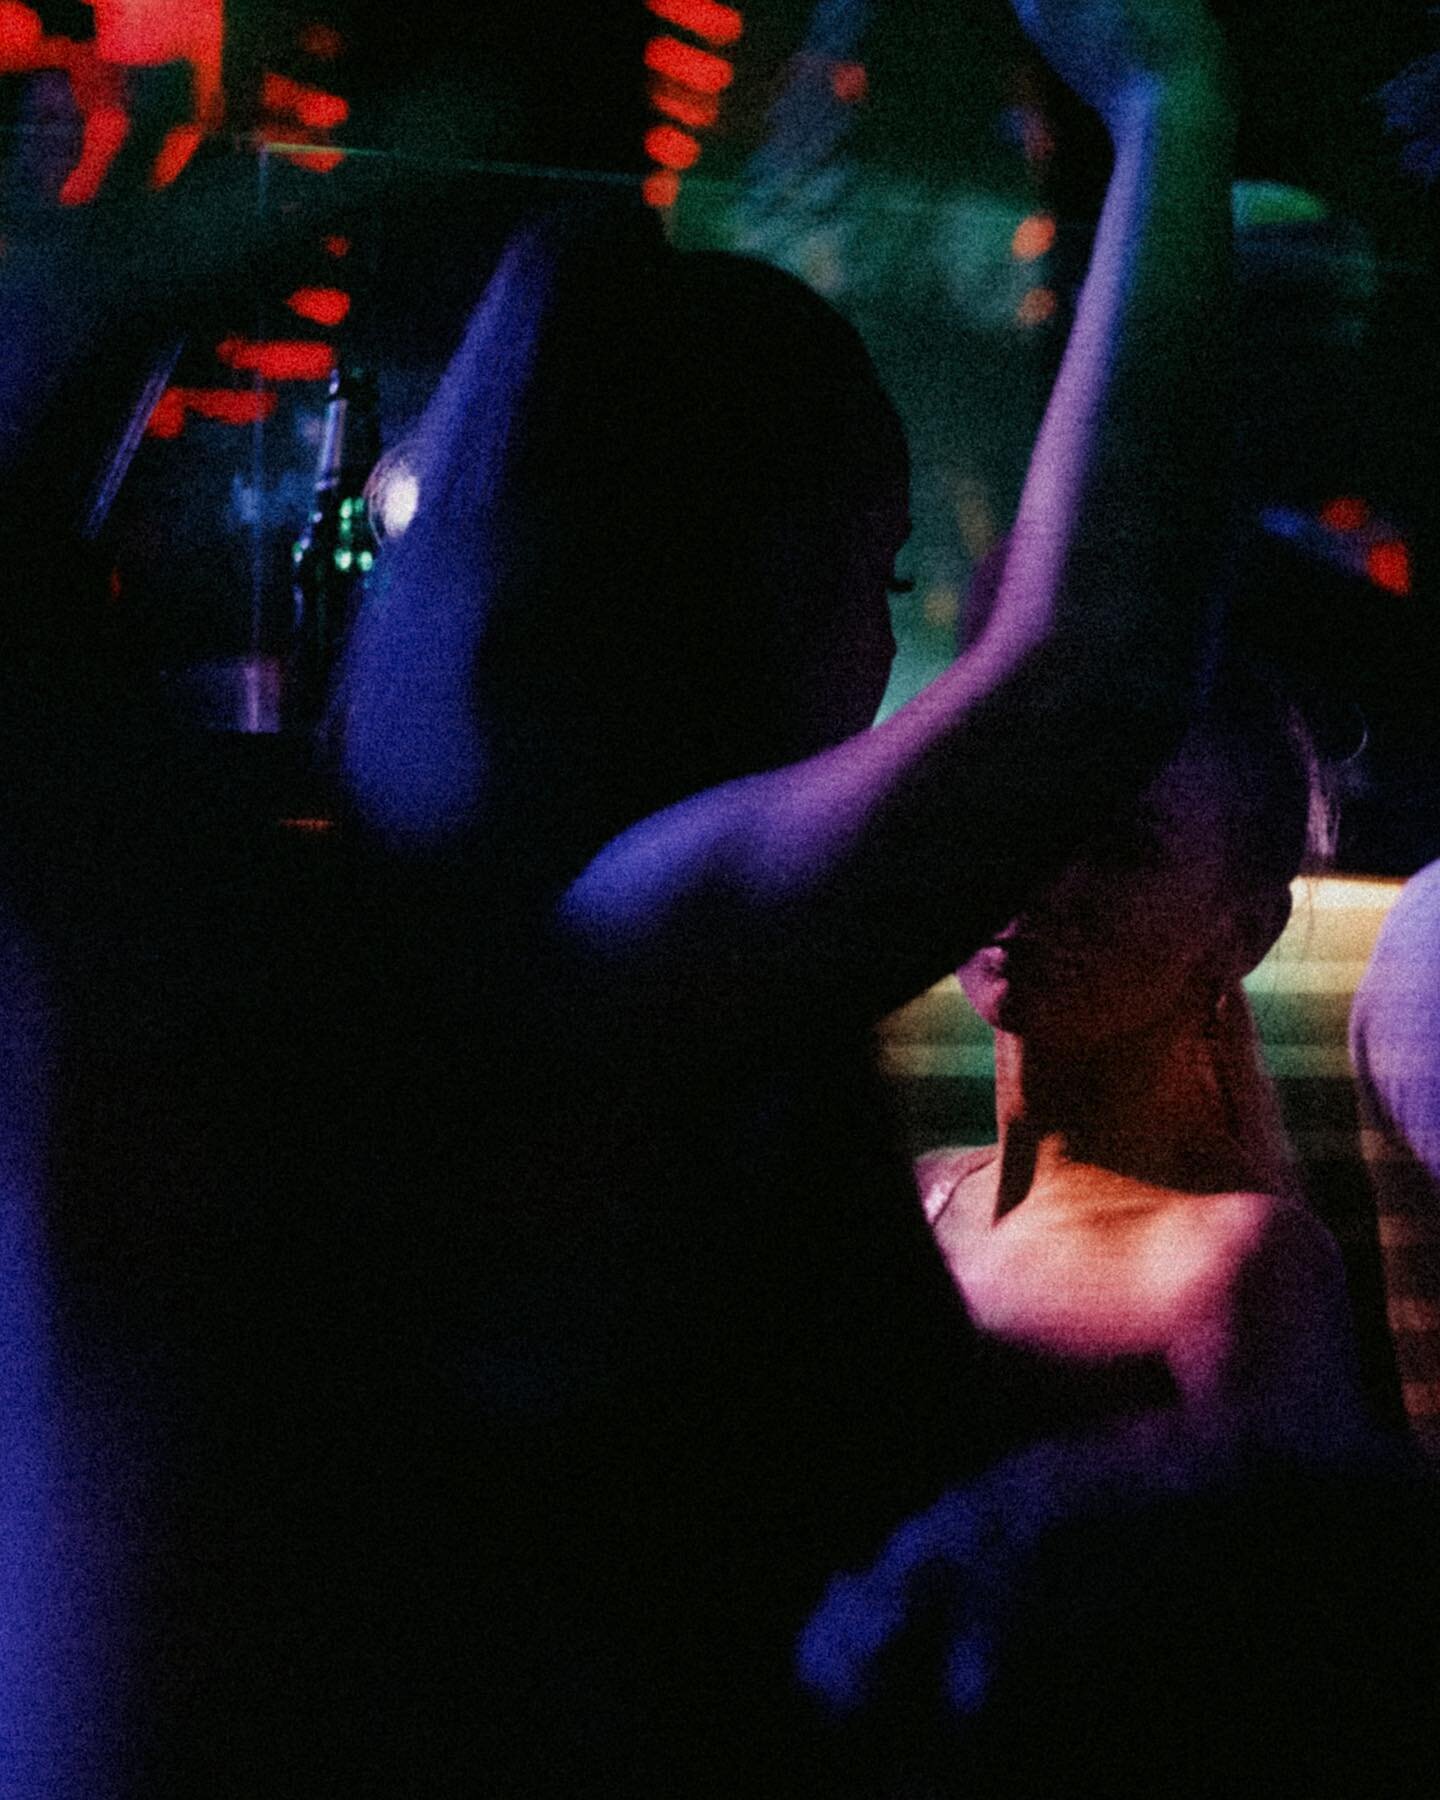 Nocturnal, Bangkok 2022
.
I&rsquo;ve finally gotten over my fear and started doing something I&rsquo;ve been meaning to do a long time ago - to candidly capture night life. I think what I love doing more than anything is to capture moments that feel 